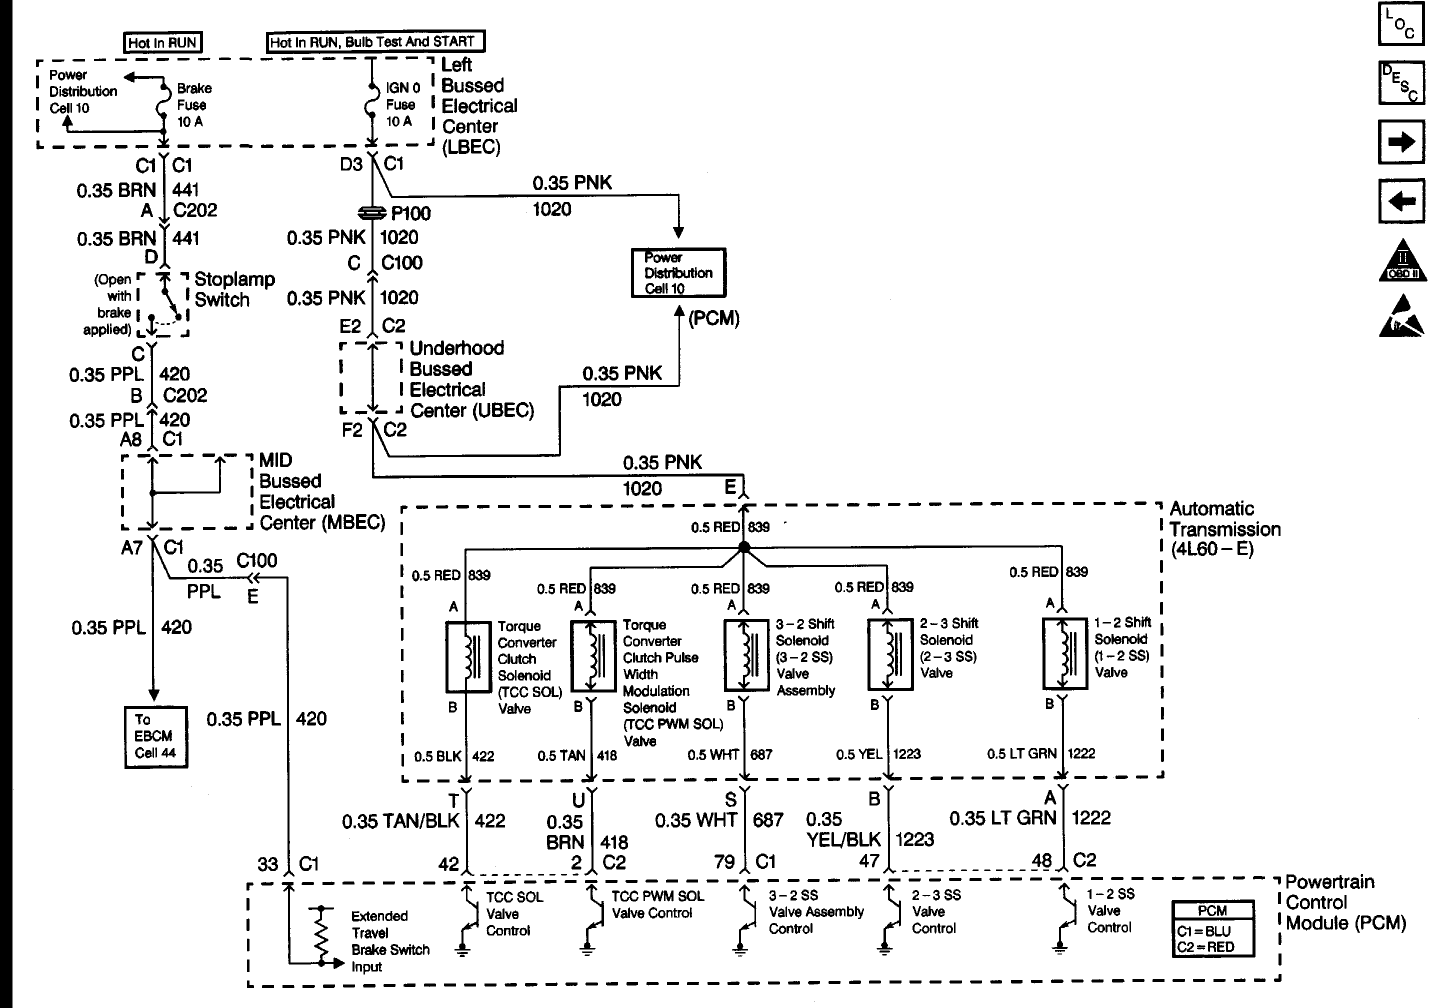 Wiring Schematic for 1999 GMC Sierra 1500 [Specifically up and down stream  IGN0 Fuse] - PerformanceTrucks.net Forums 7 Pole Trailer Wiring Diagram PerformanceTrucks.net Forums